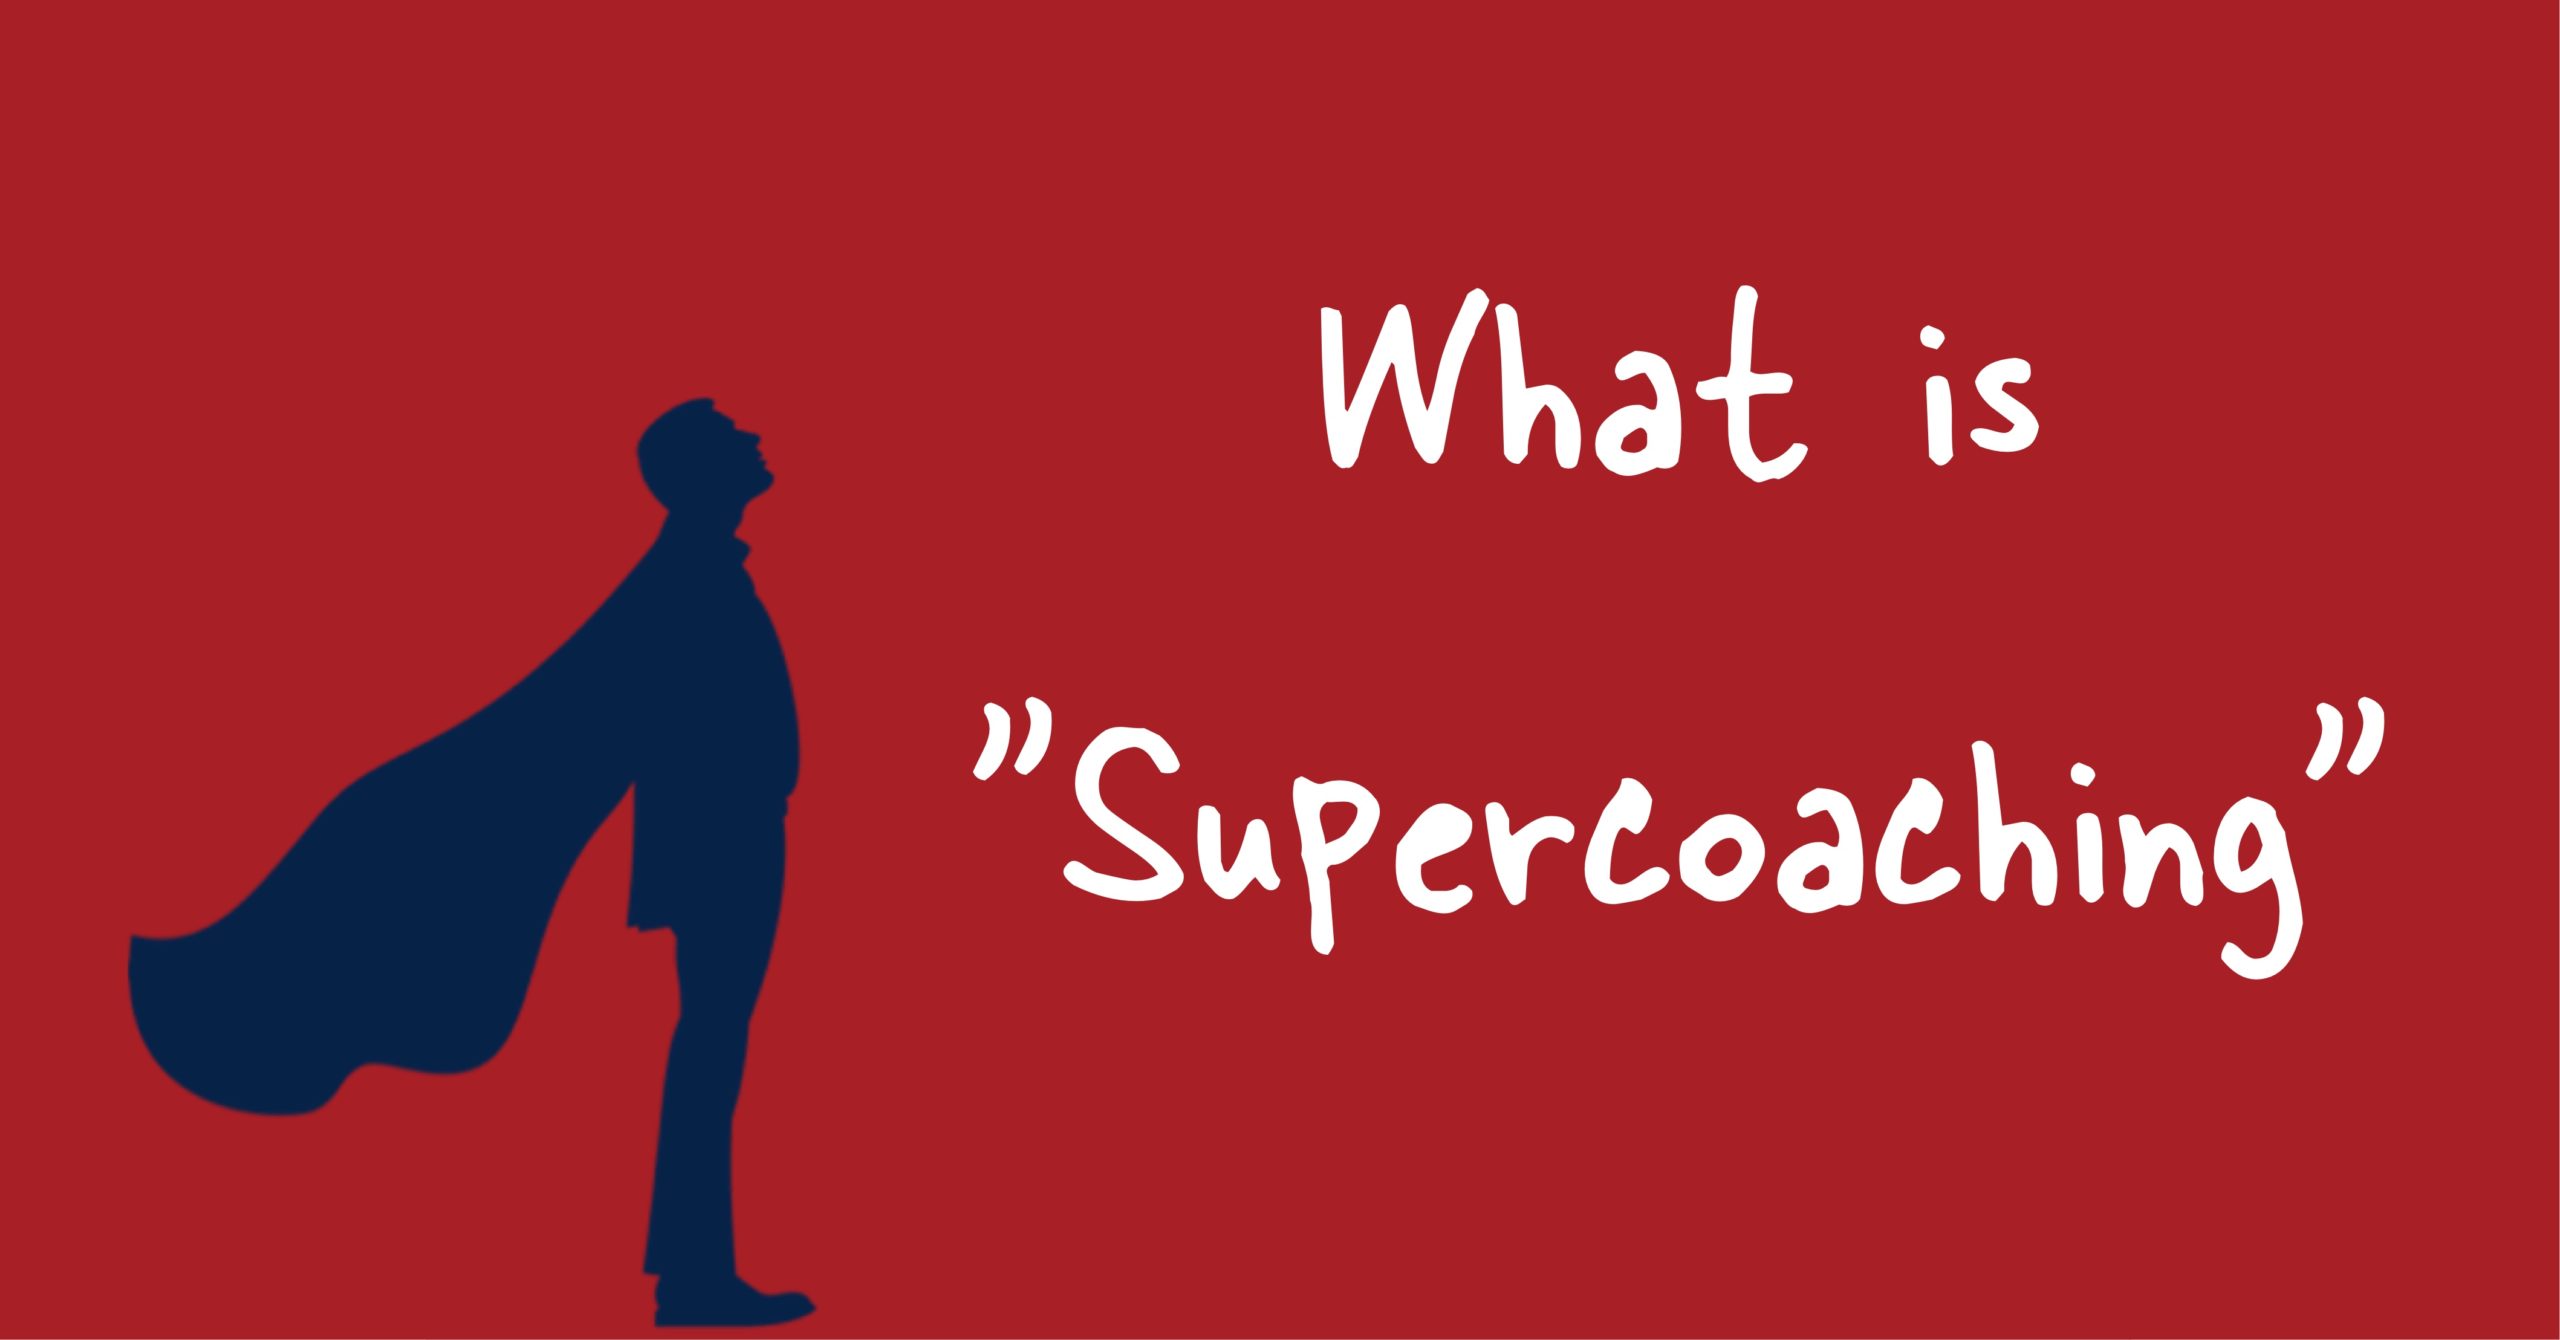 What is “Supercoaching”?